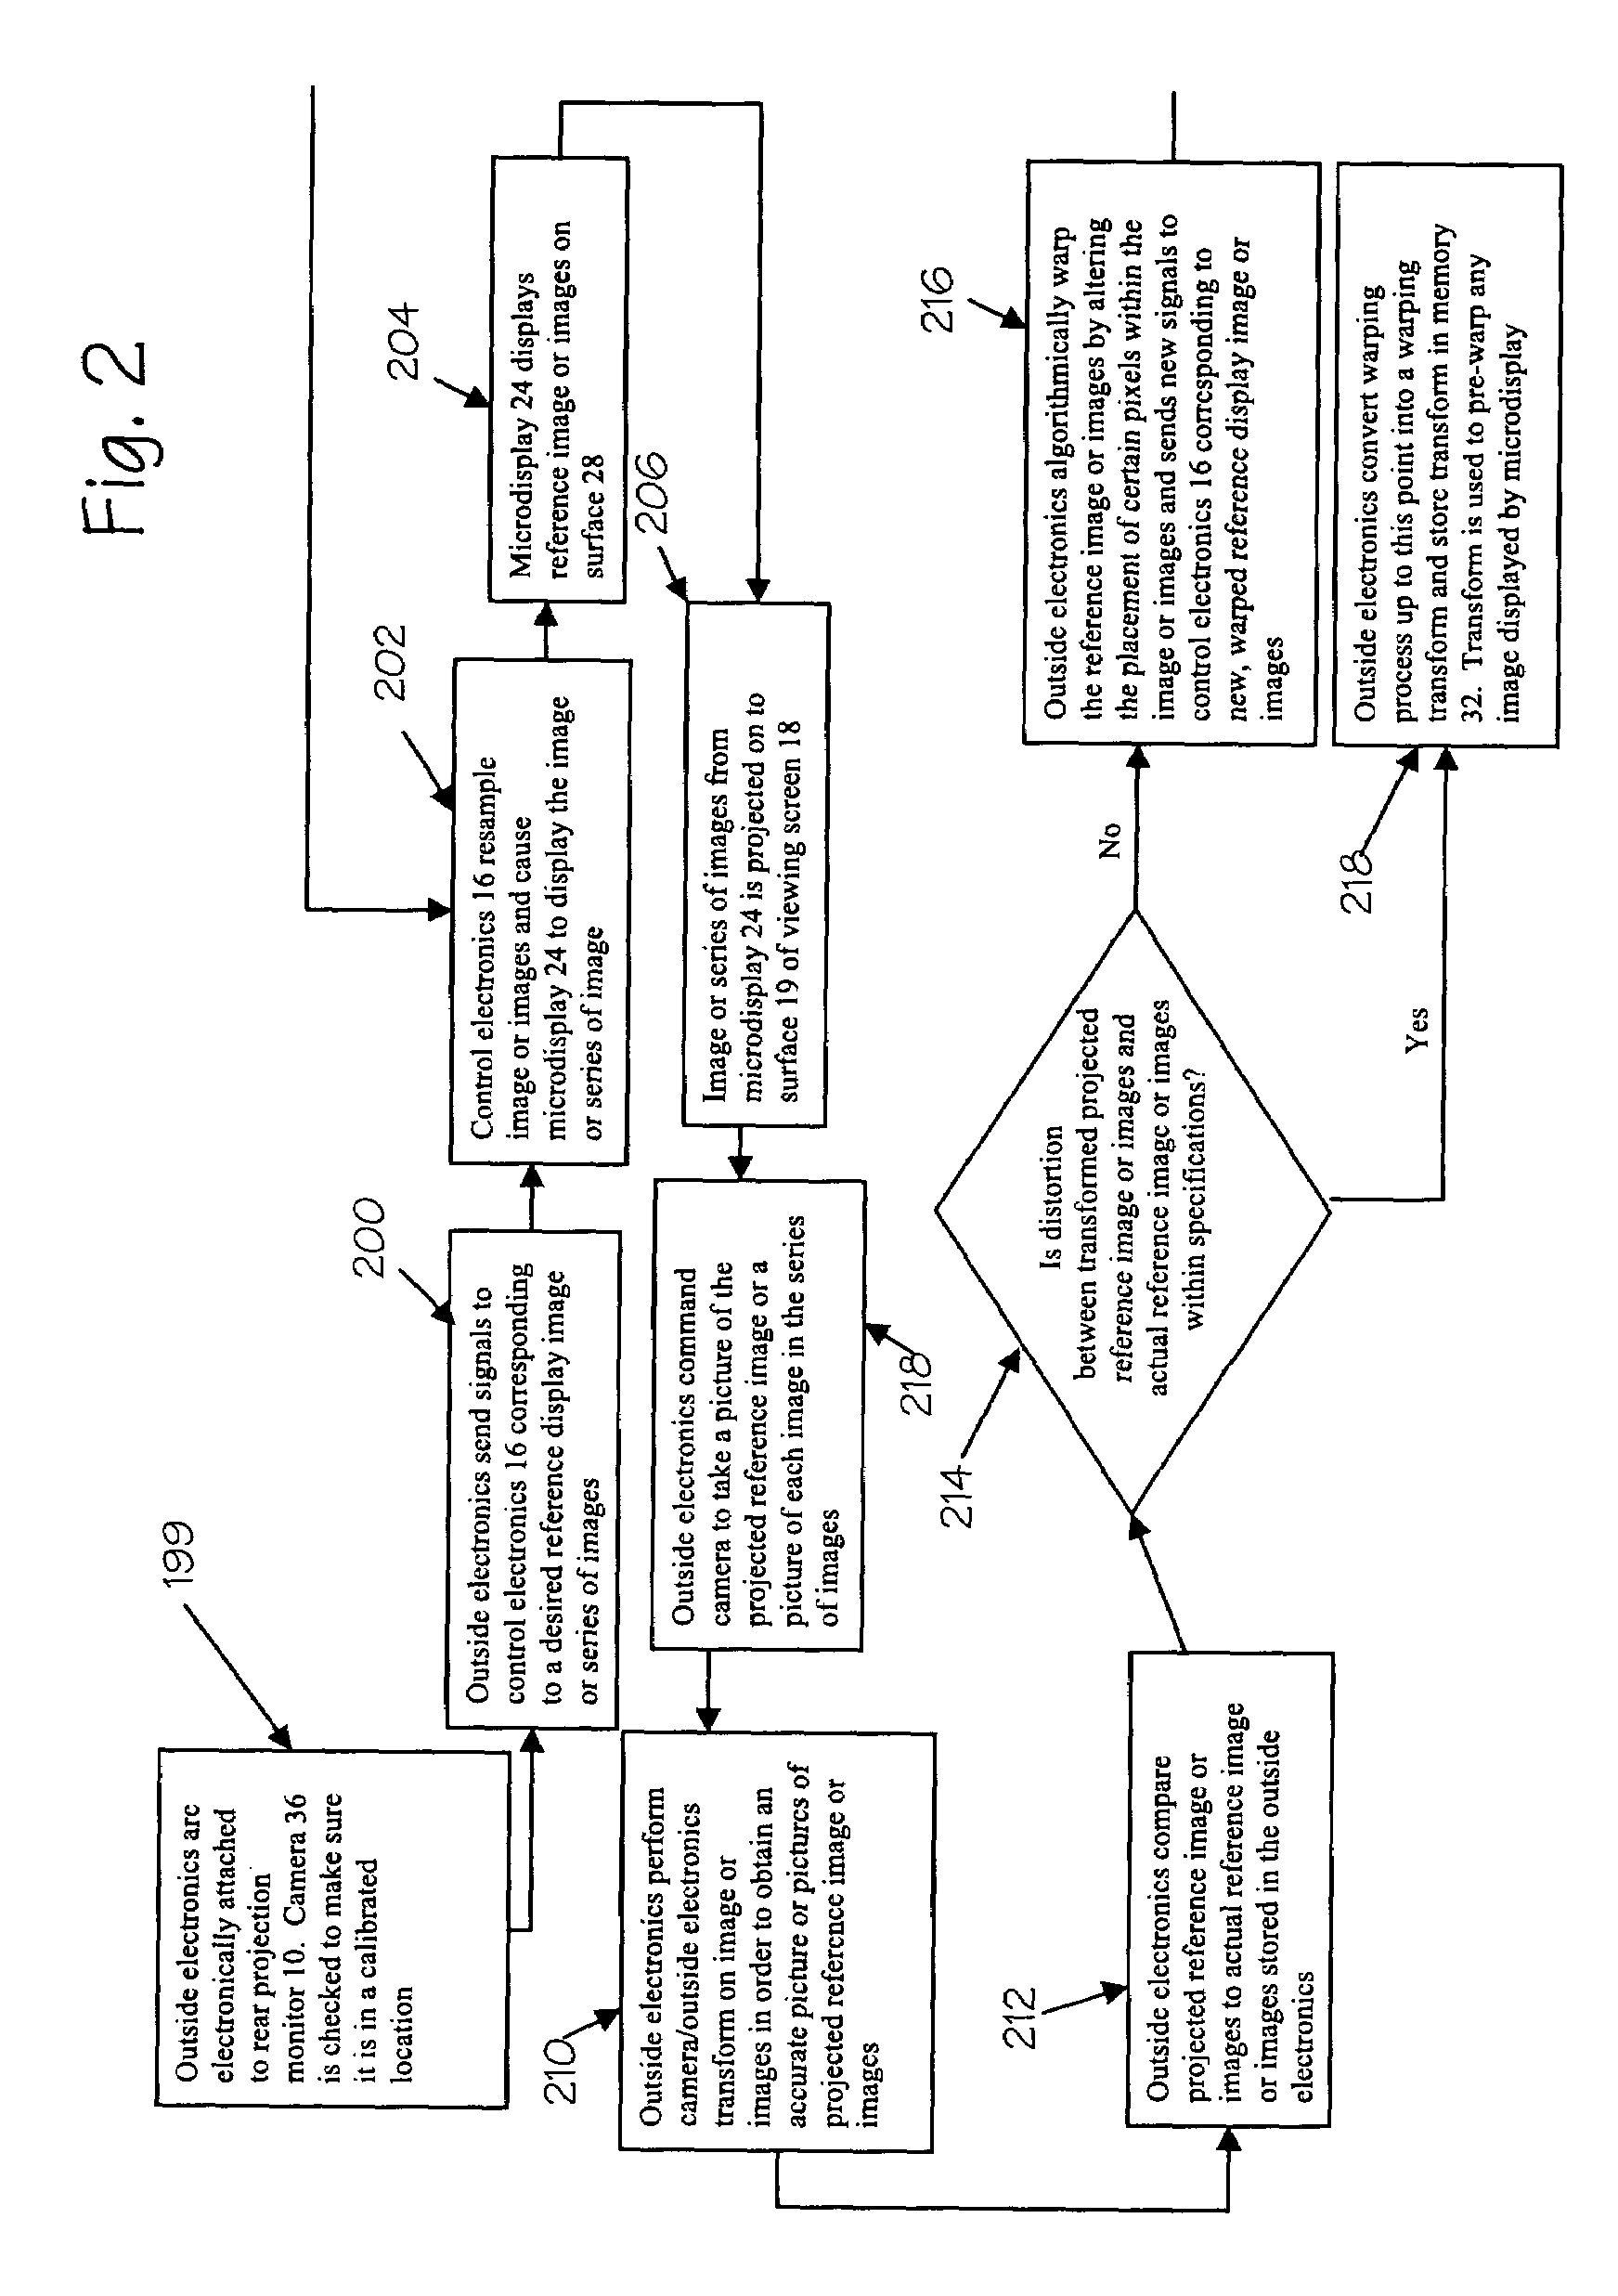 Rear projection imaging system with image warping distortion correction system and associated method